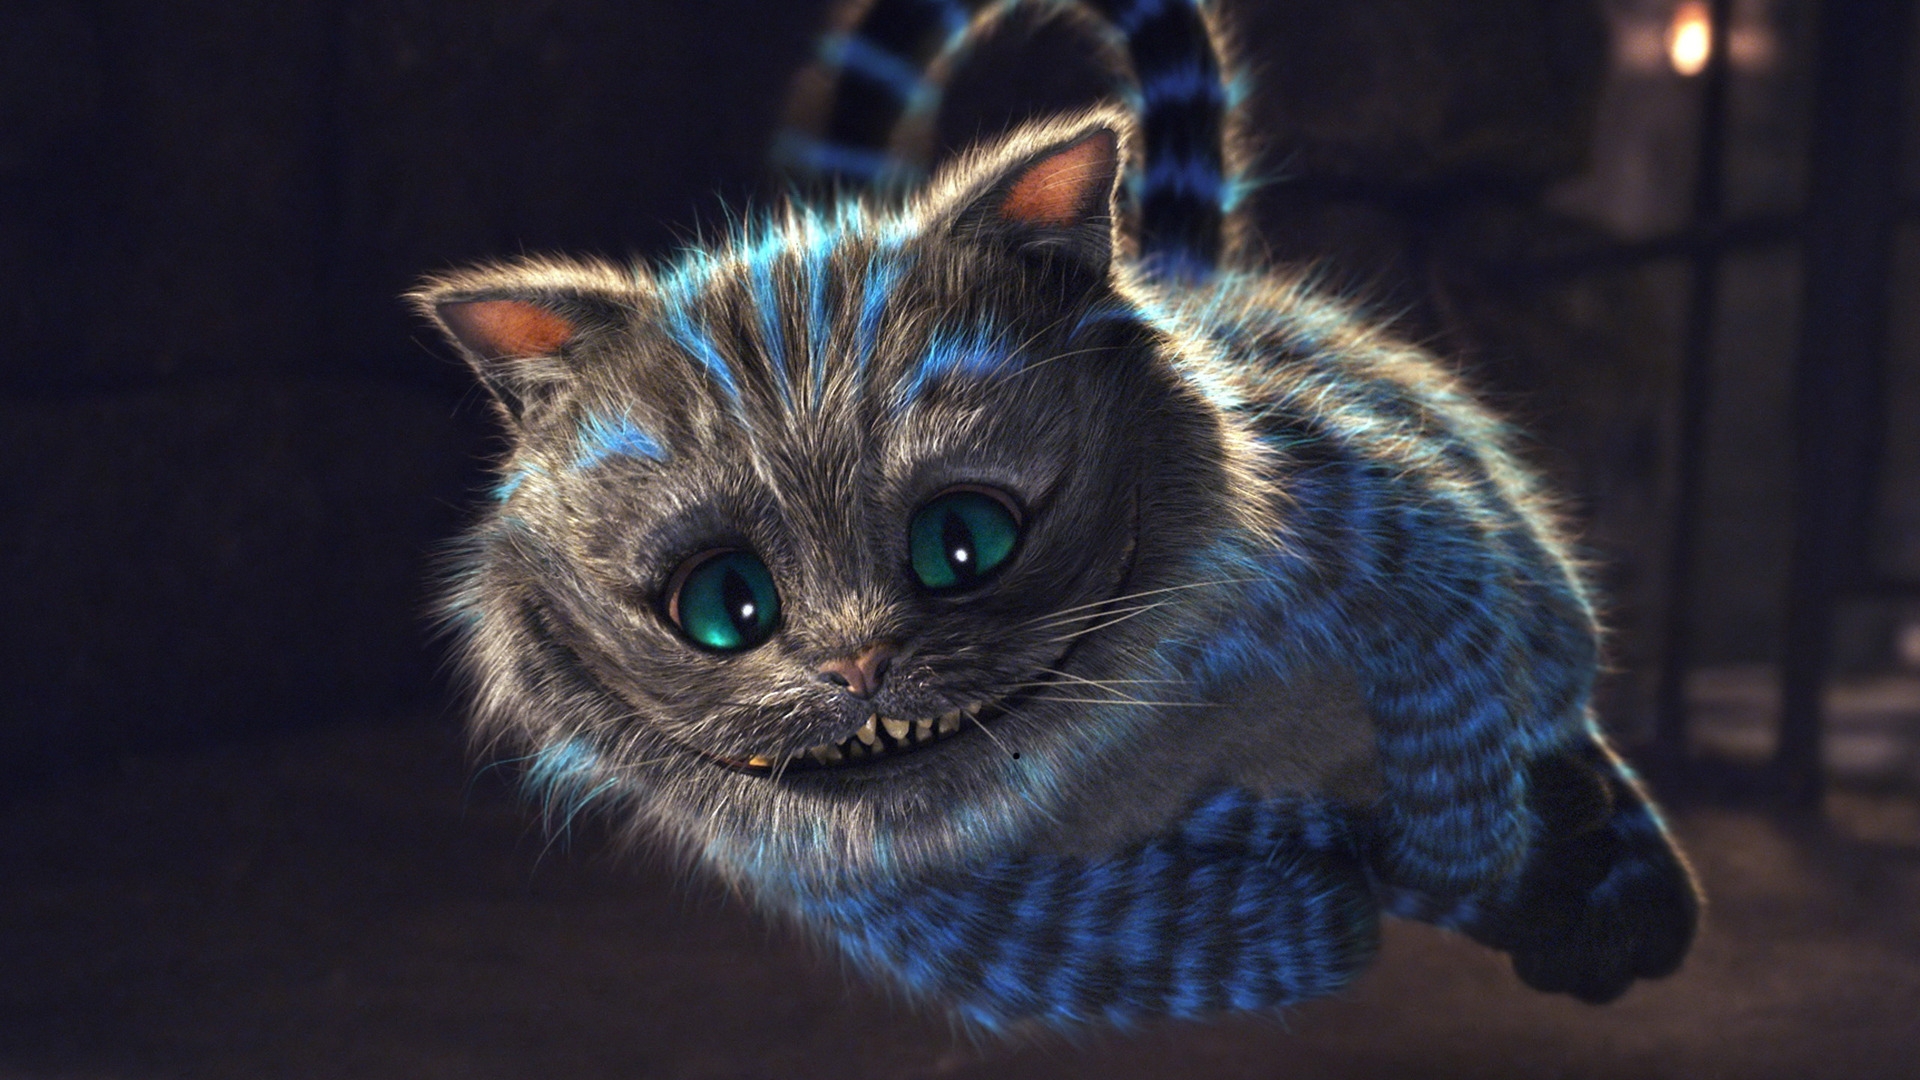 Alice in Wonderland The Cheshire Cat for 1920 x 1080 HDTV 1080p resolution